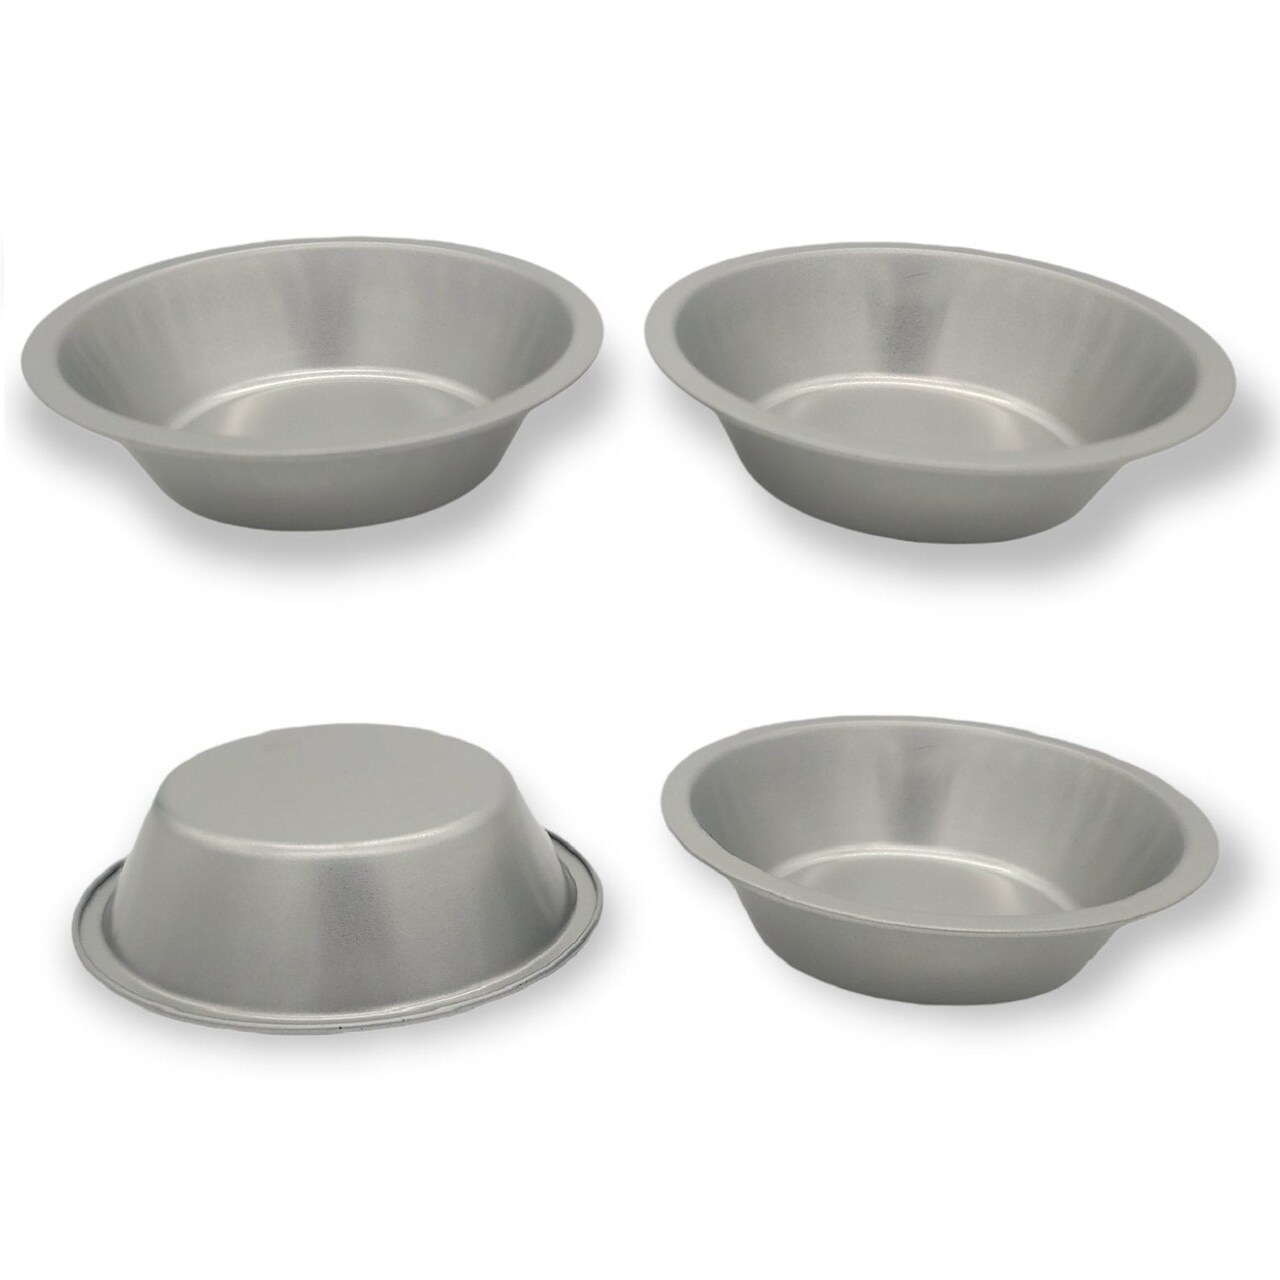 Handy Housewares 5 Tin Non-Stick Mini Pie Pans Set of 4 - Great for  Desserts, Fruit Pies, Pot Pies and Quiches